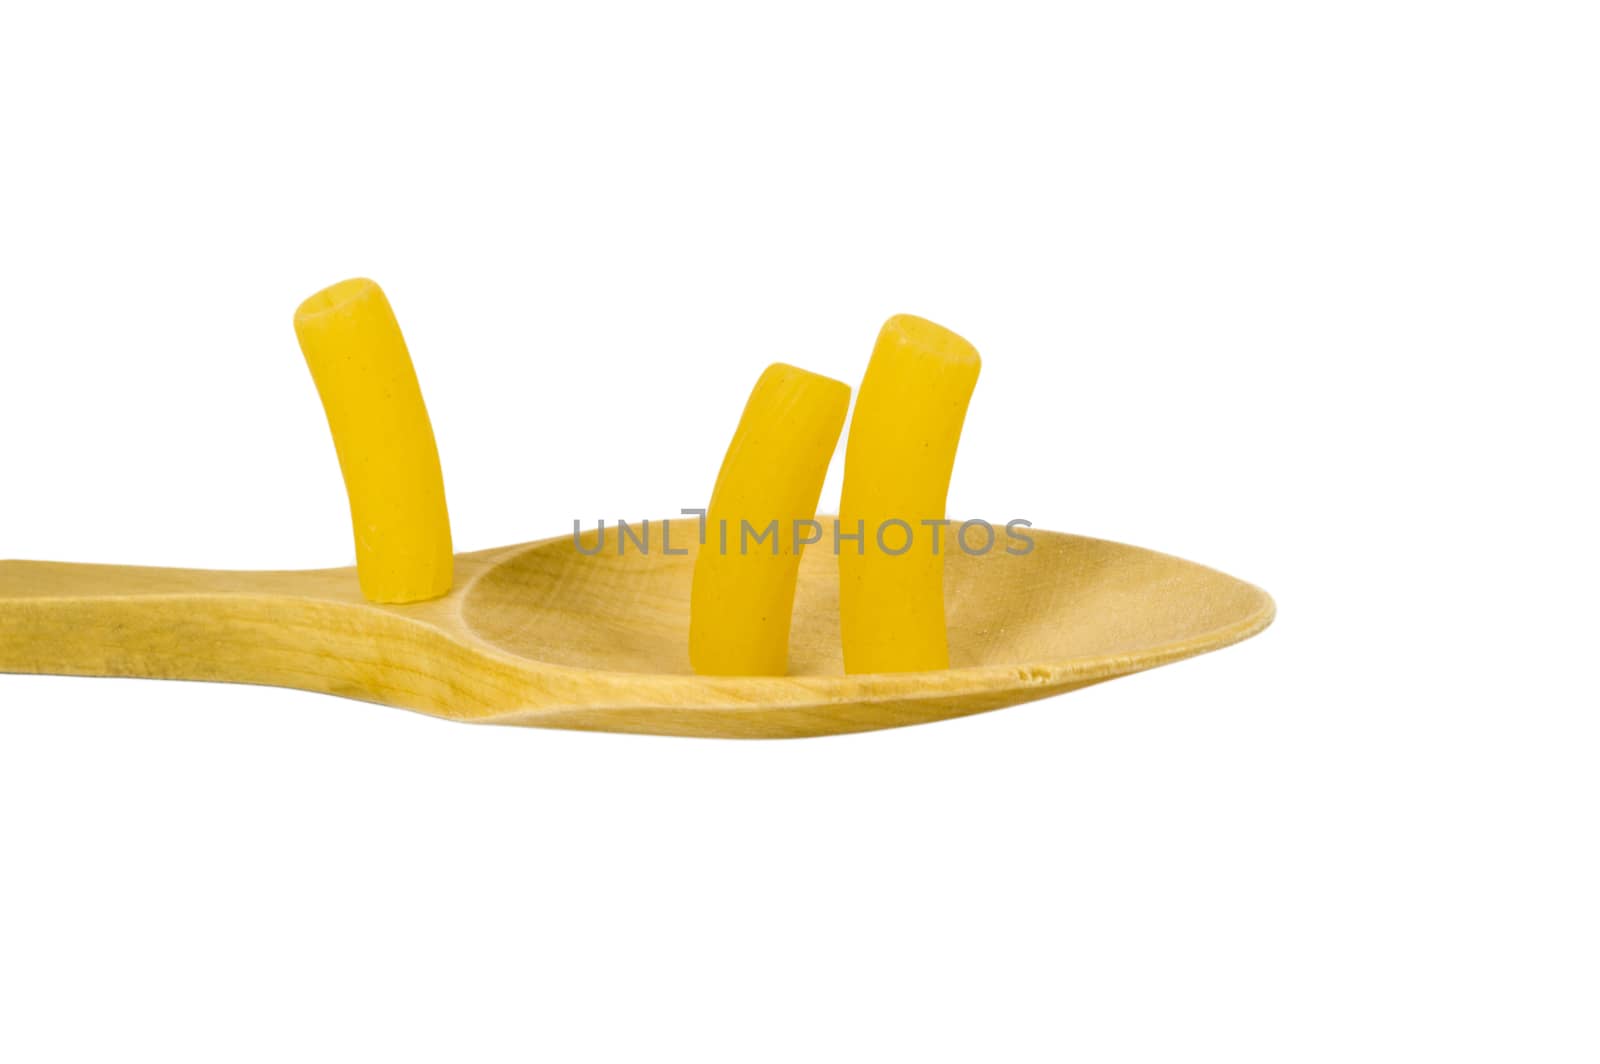 Macaroni in wooden spoon on white background